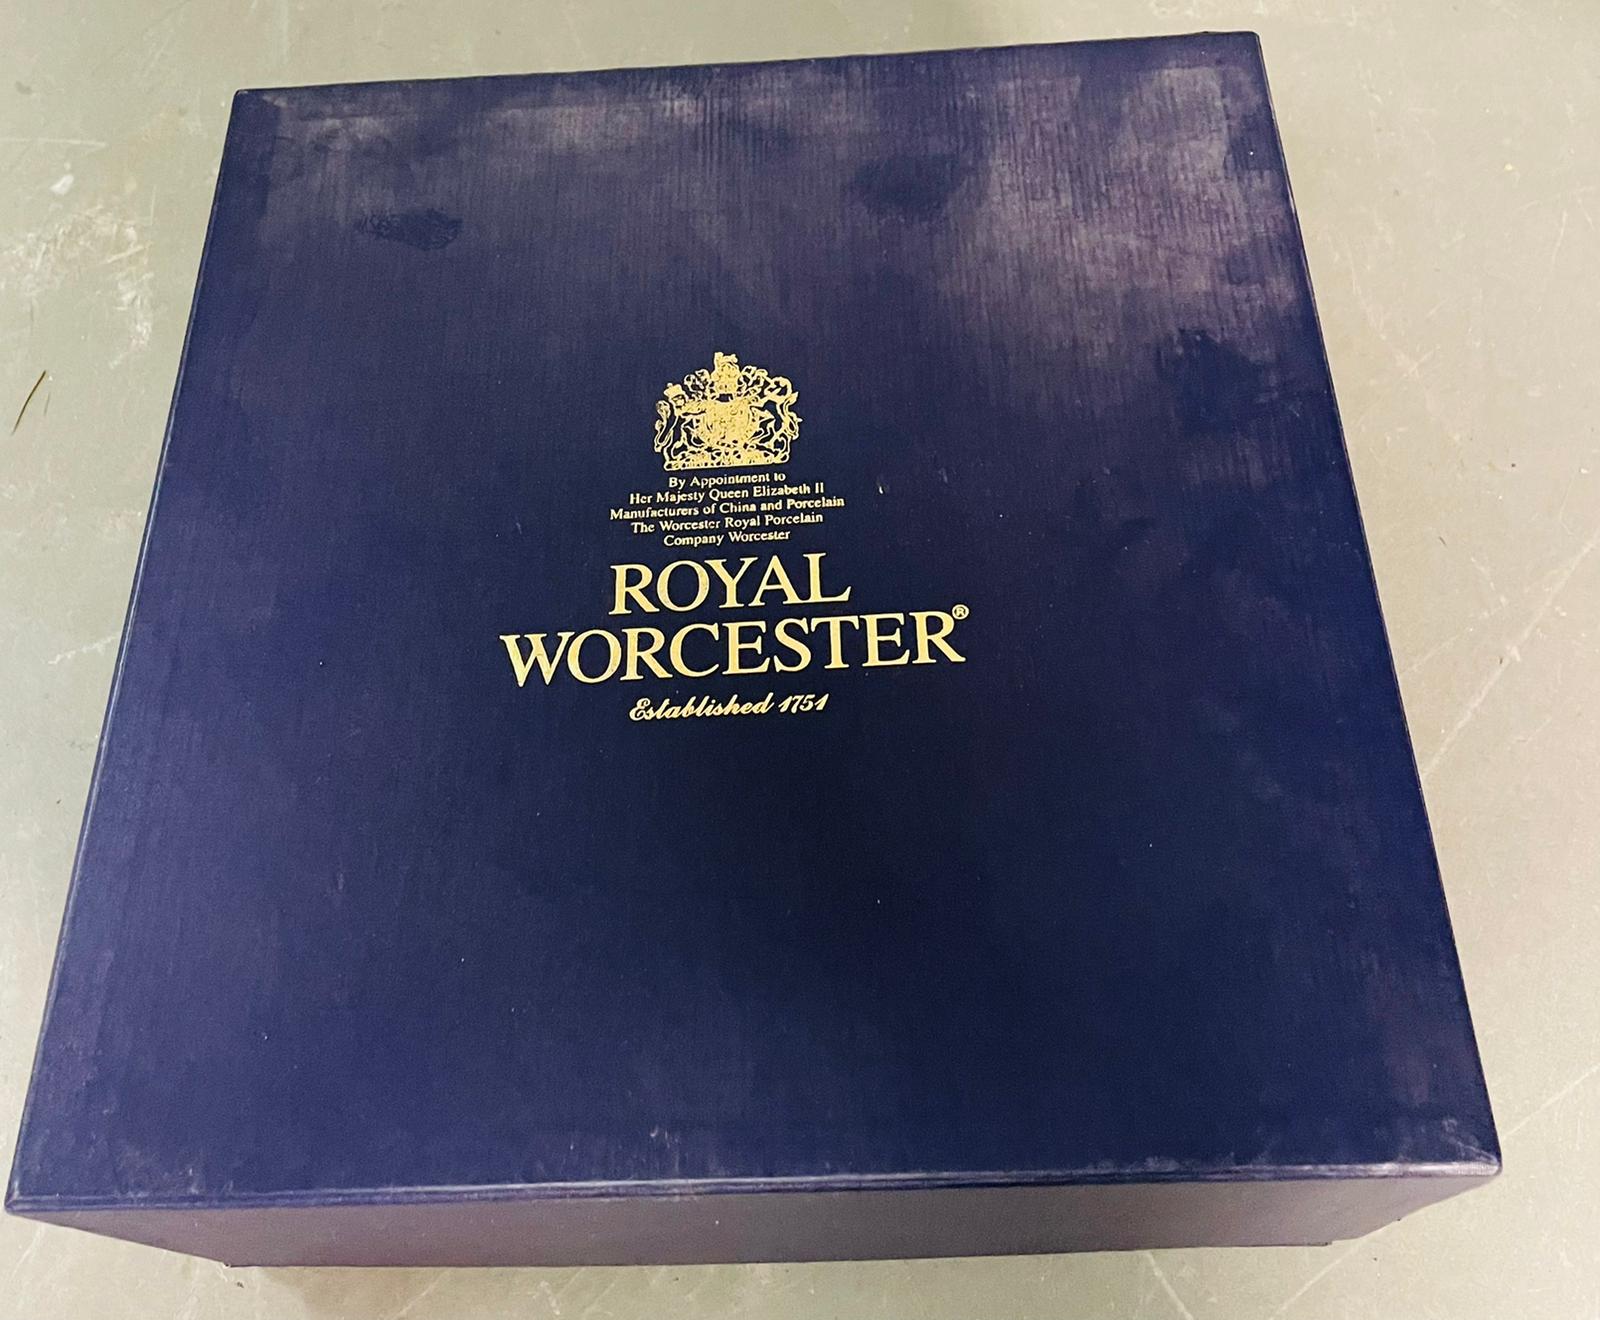 A Royal Worcester limited edition 2000 millennium flight bowl, boxed with certificate - Image 2 of 3